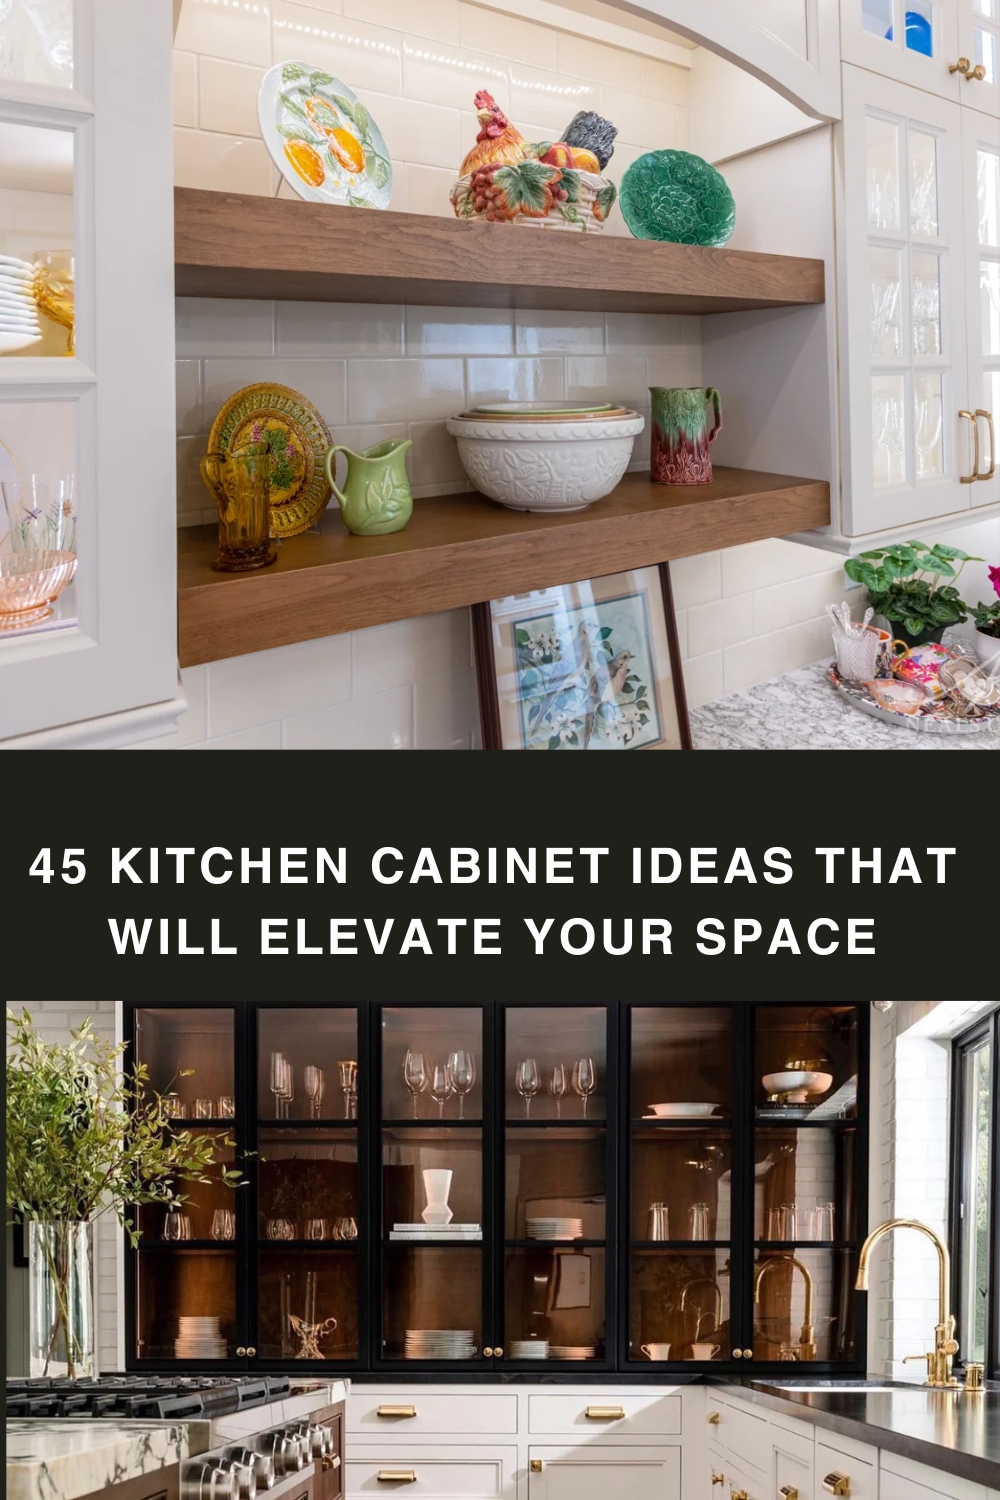 45 Kitchen Cabinet Ideas That Will Elevate Your Space pin